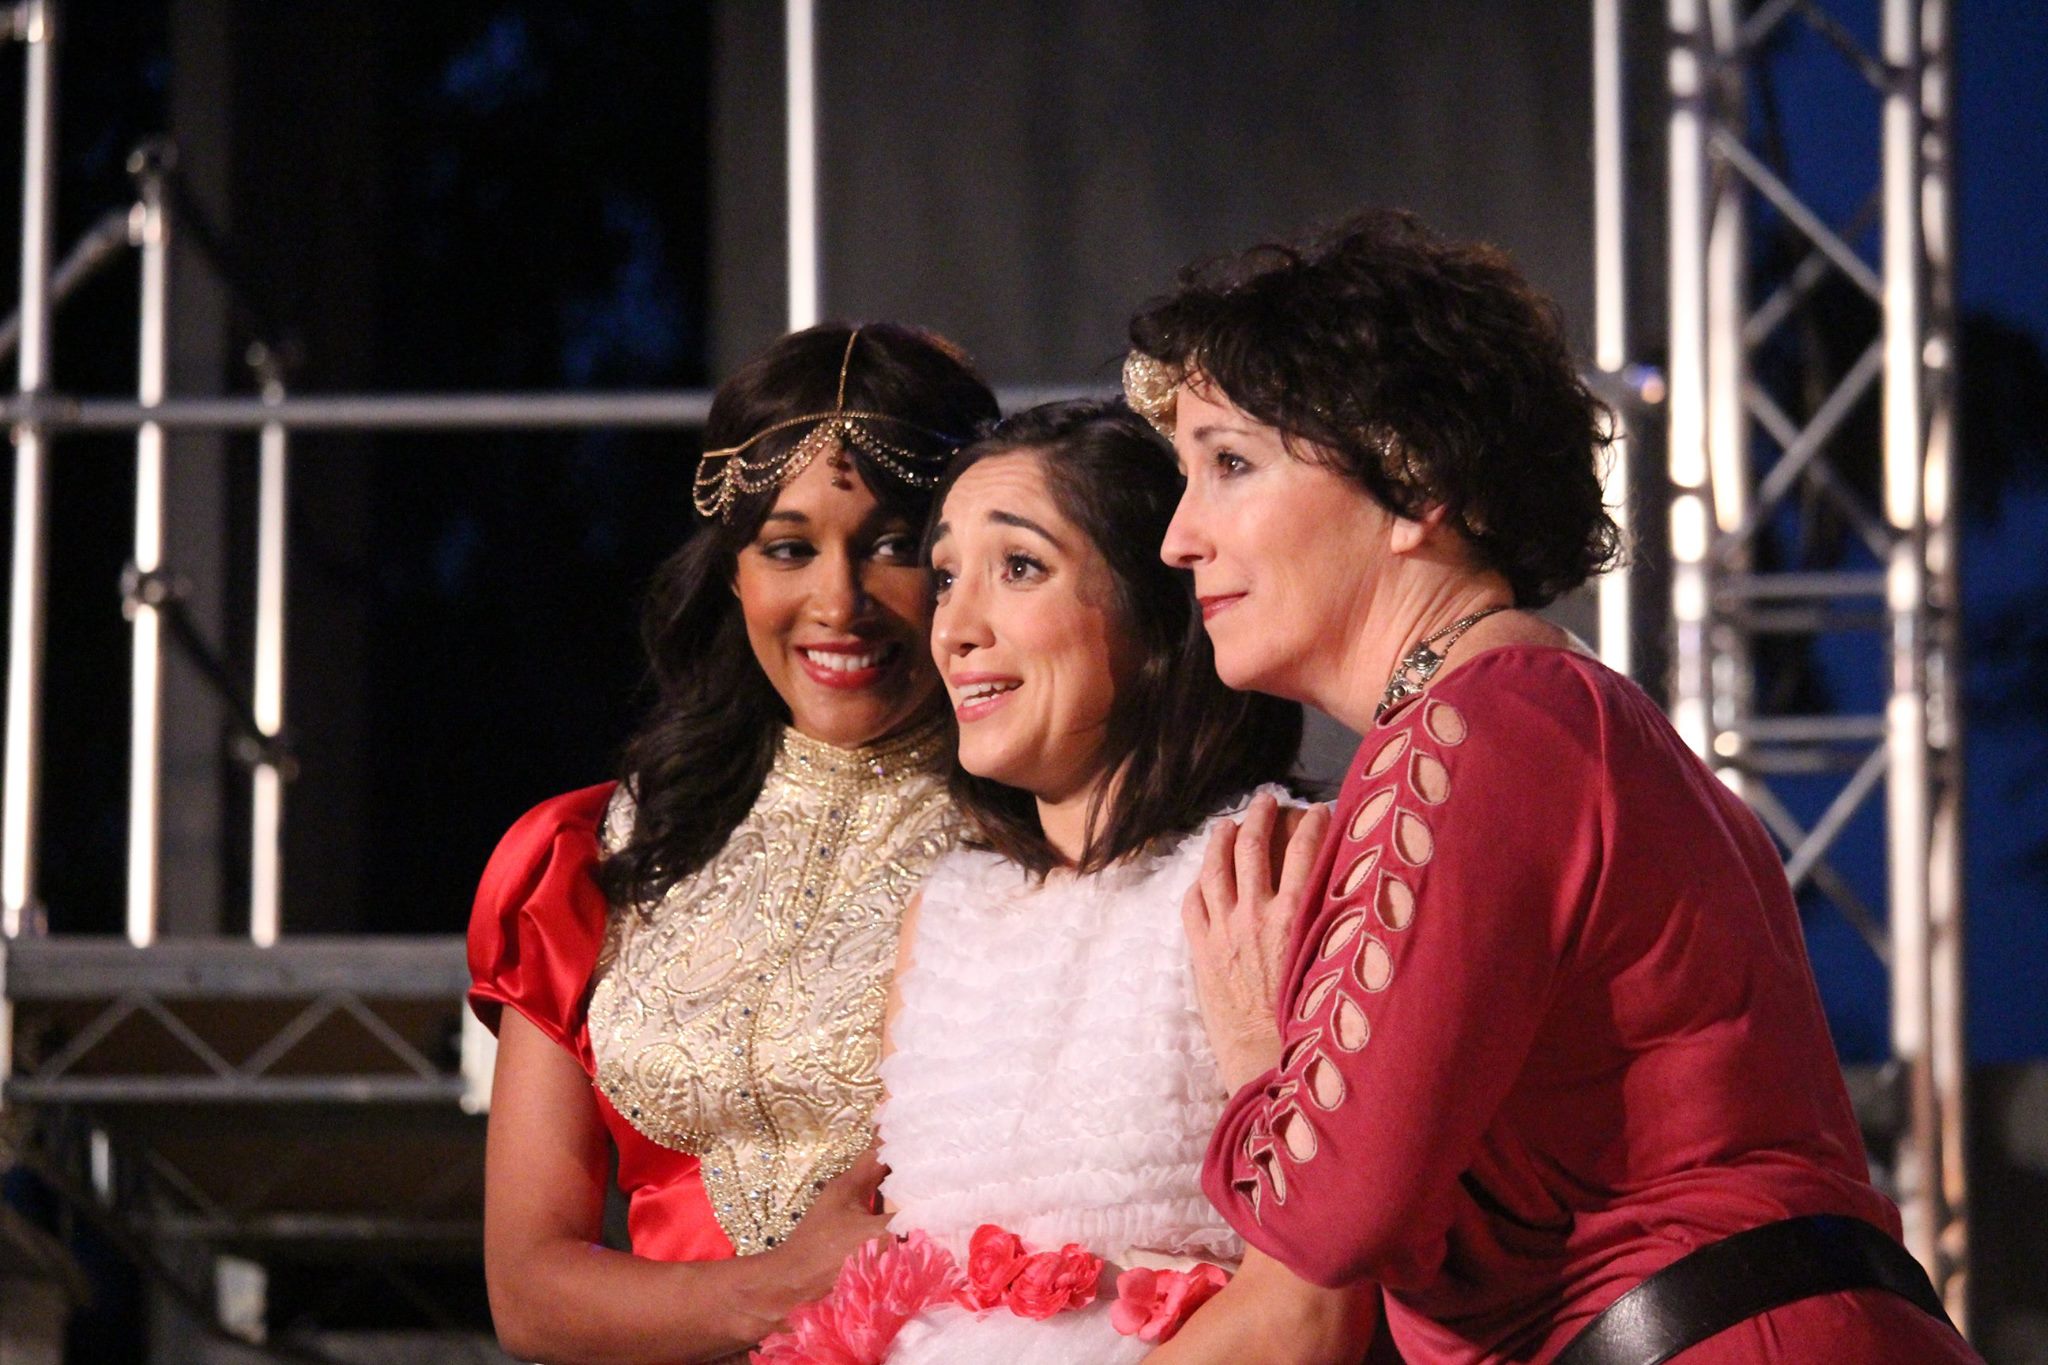 (L-R) Aisha Kabia, Erika Soto & Bernadette Sullivan in the Independent Shakespeare Co. production of 